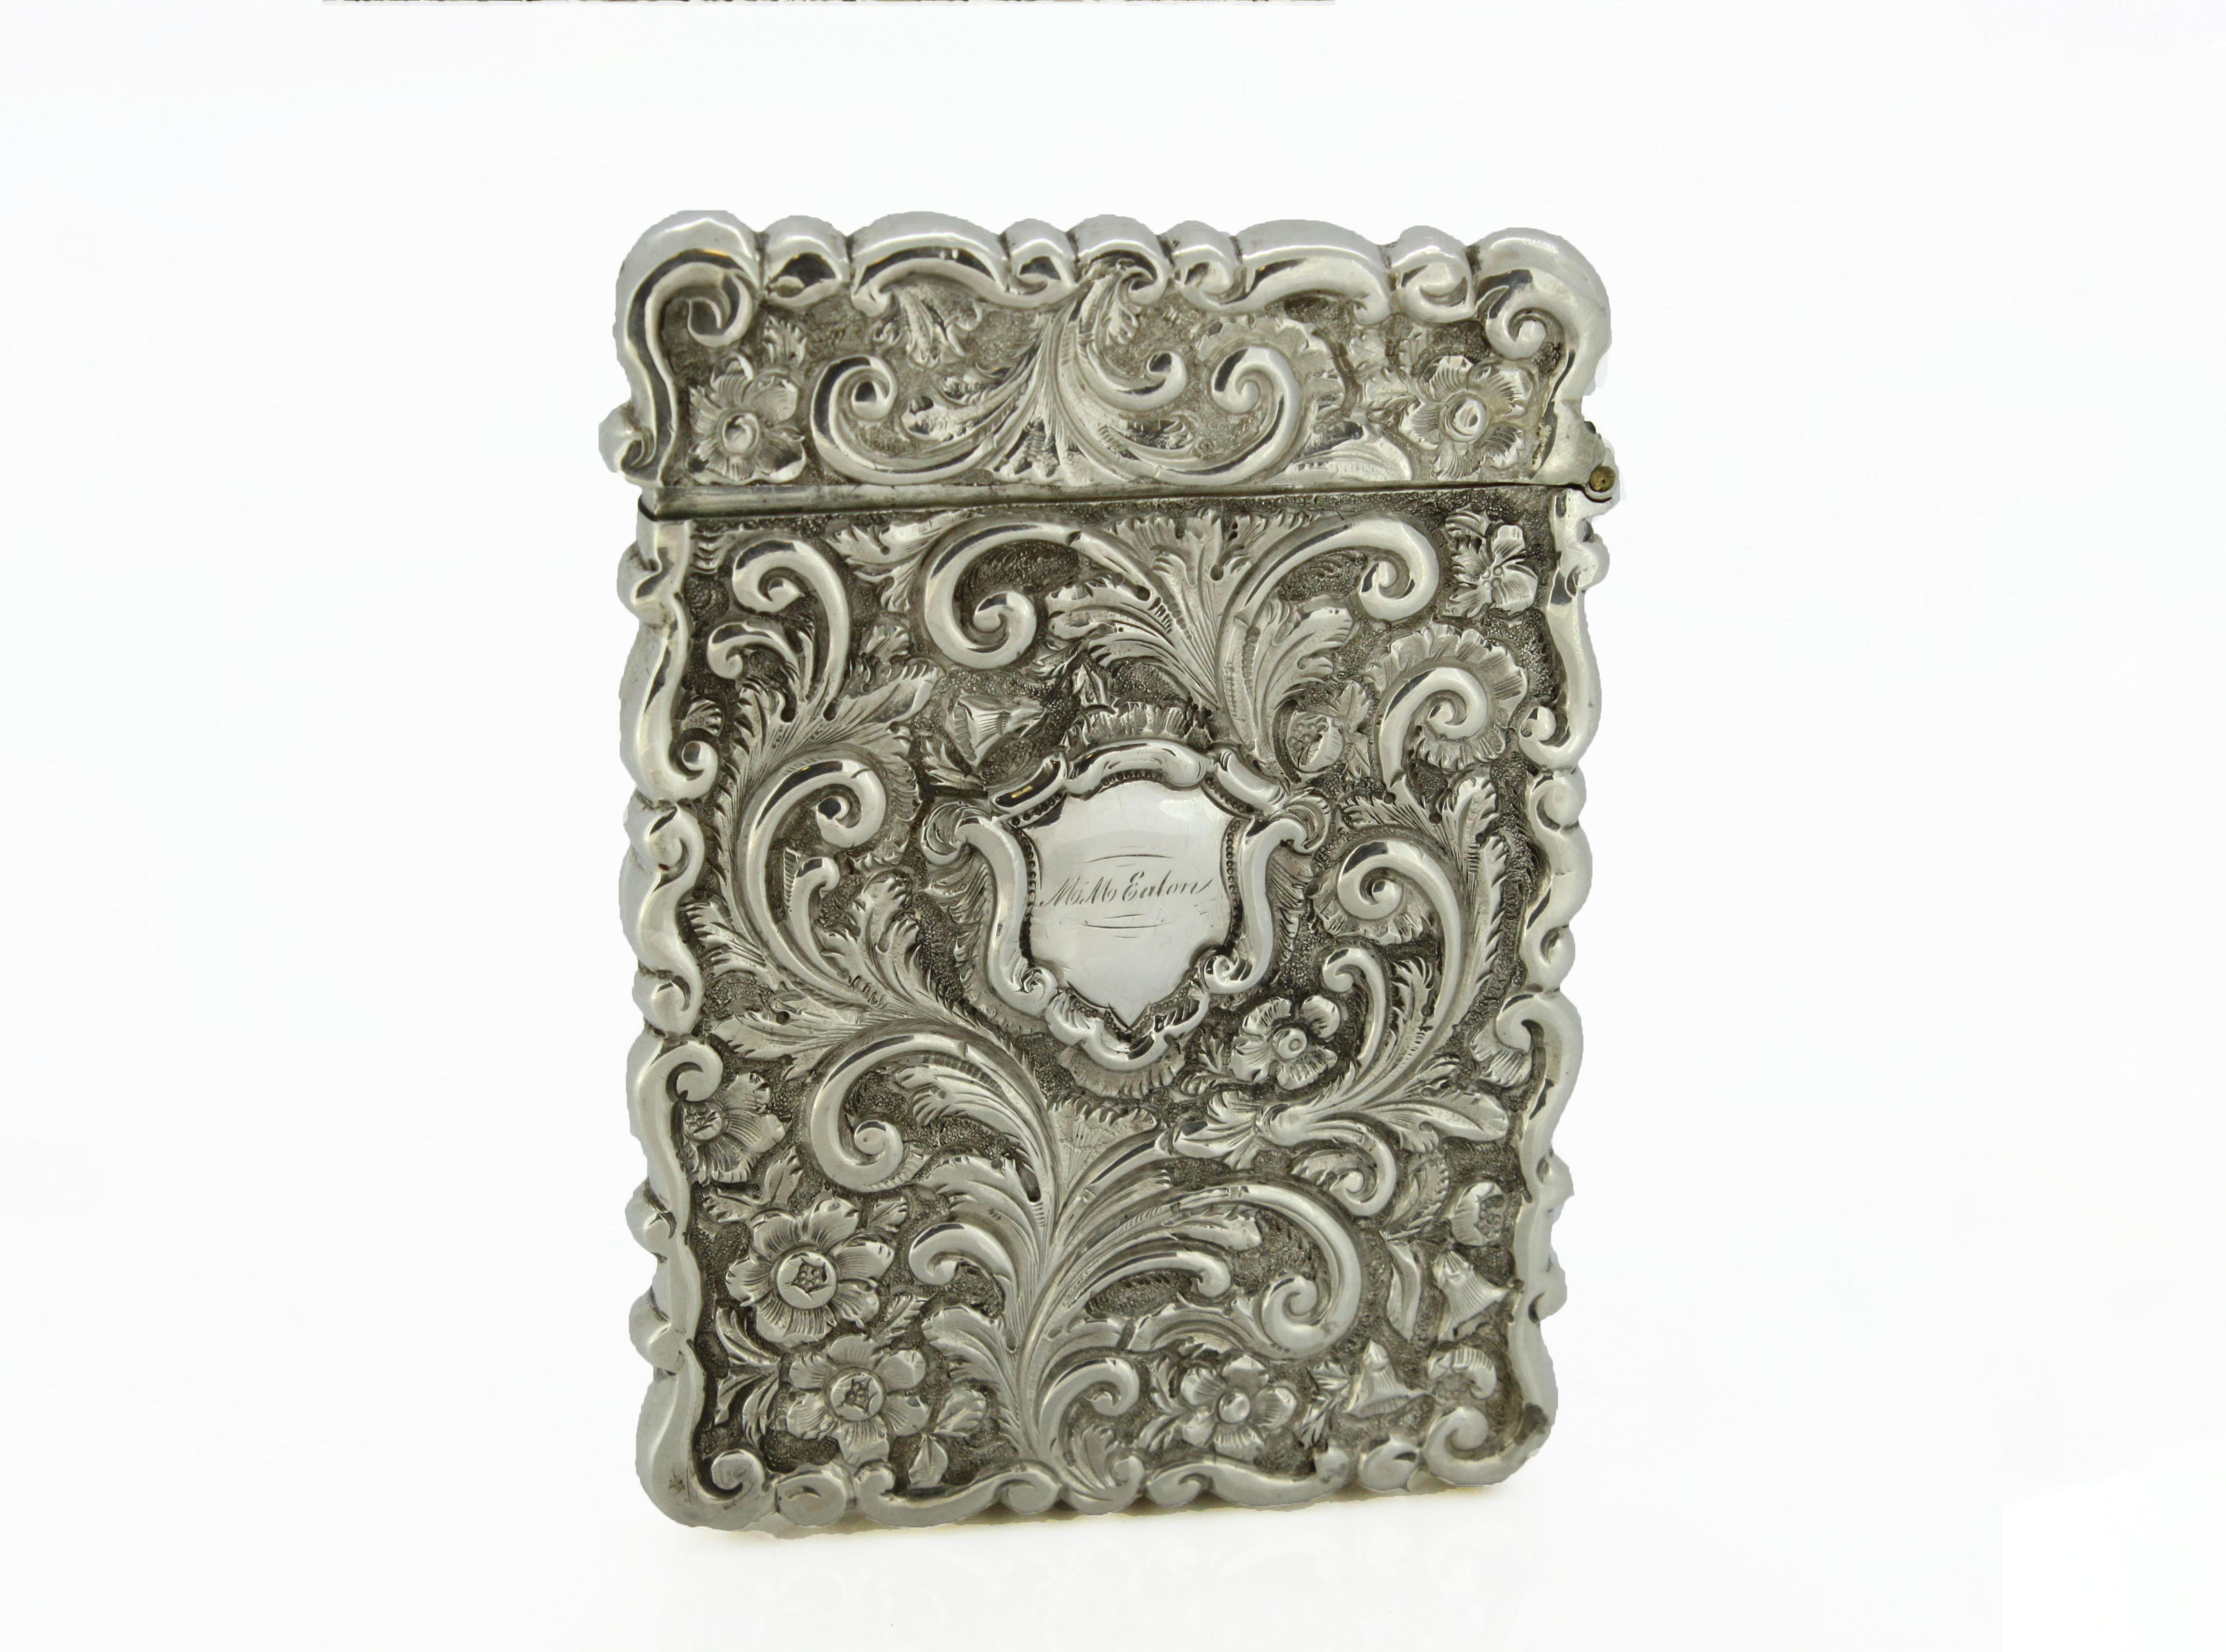 Antique Victorian silver card case

Made in England, Birmingham, 1852
Maker: R (unidentified) 

Dimensions:
10.2 x 7.5 x 1 cm

Weight: 73 grams

Condition: Item is pre - owned, item has minor age related wear and tear, otherwise excellent